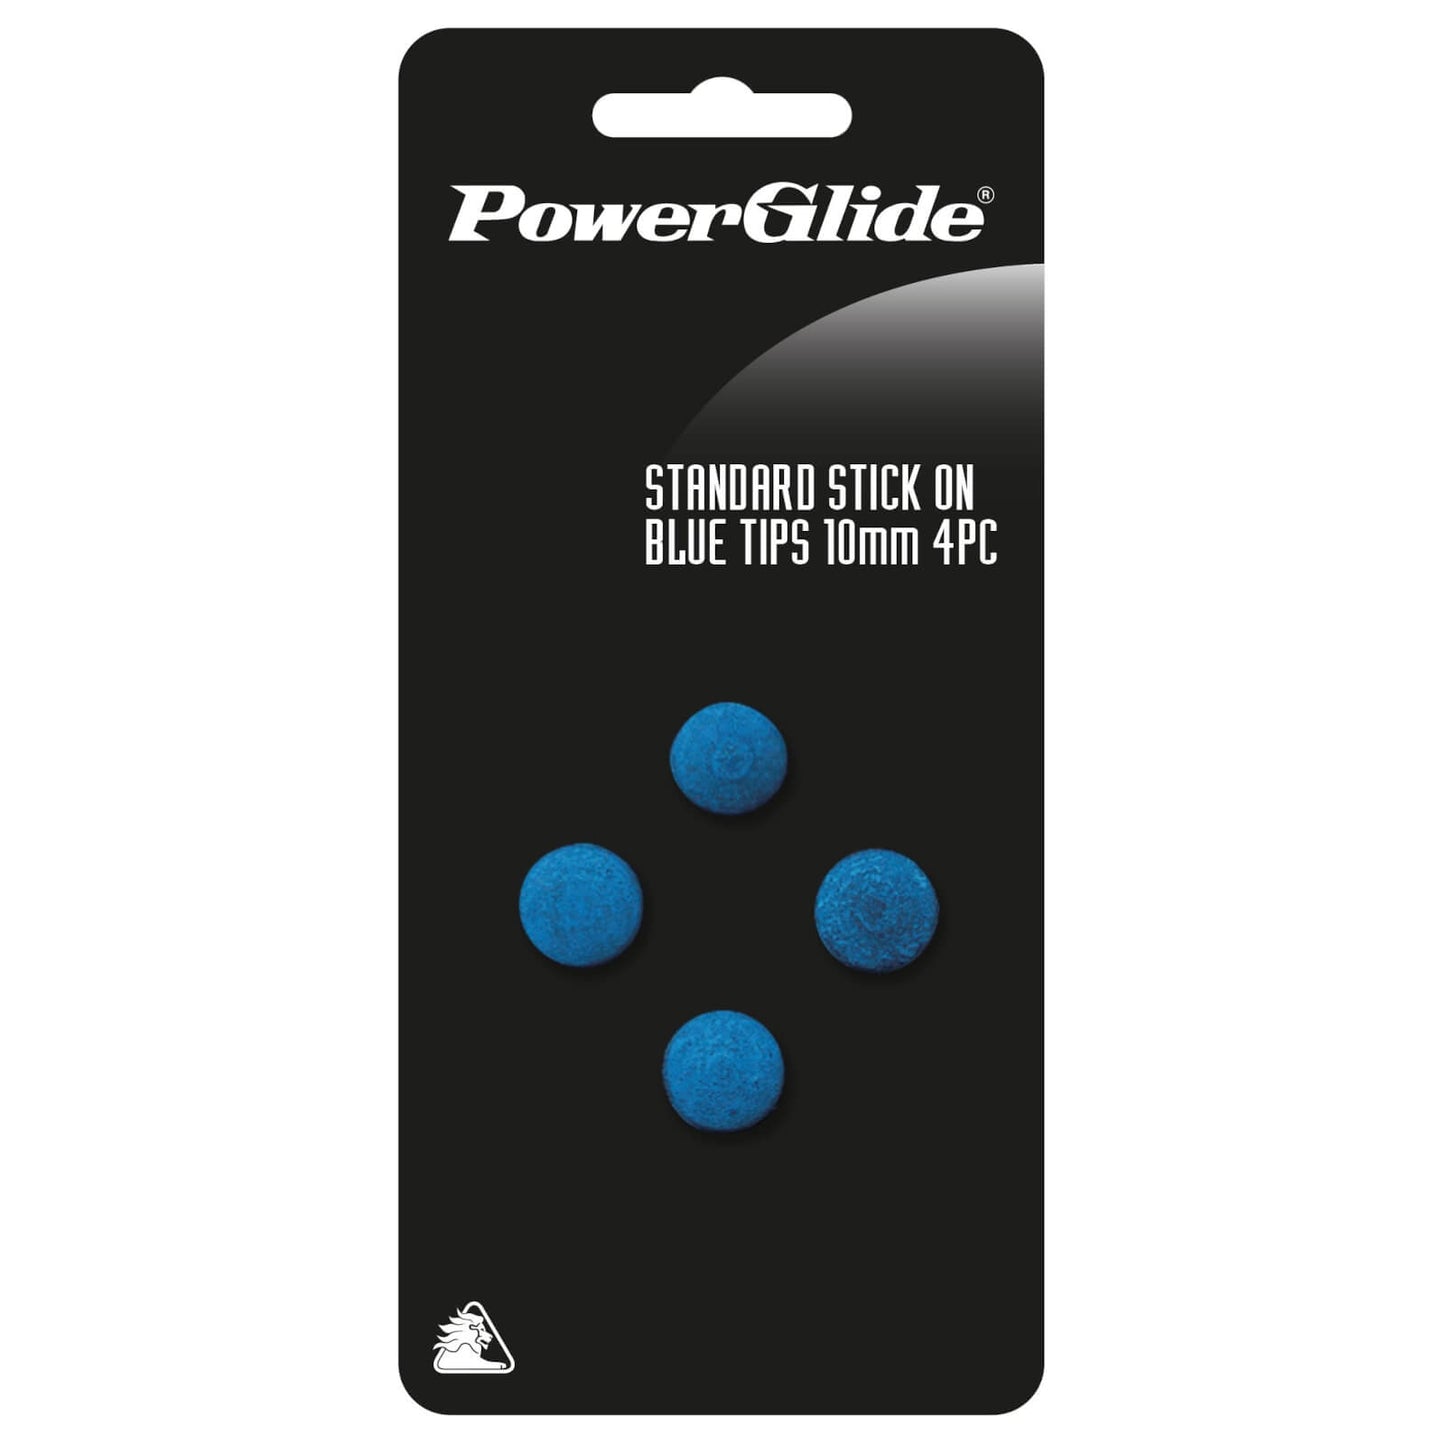 PowerGlide TIPS STANDARD STICK ON BLUE 11MM 4PC Snooker Accessory 11mm